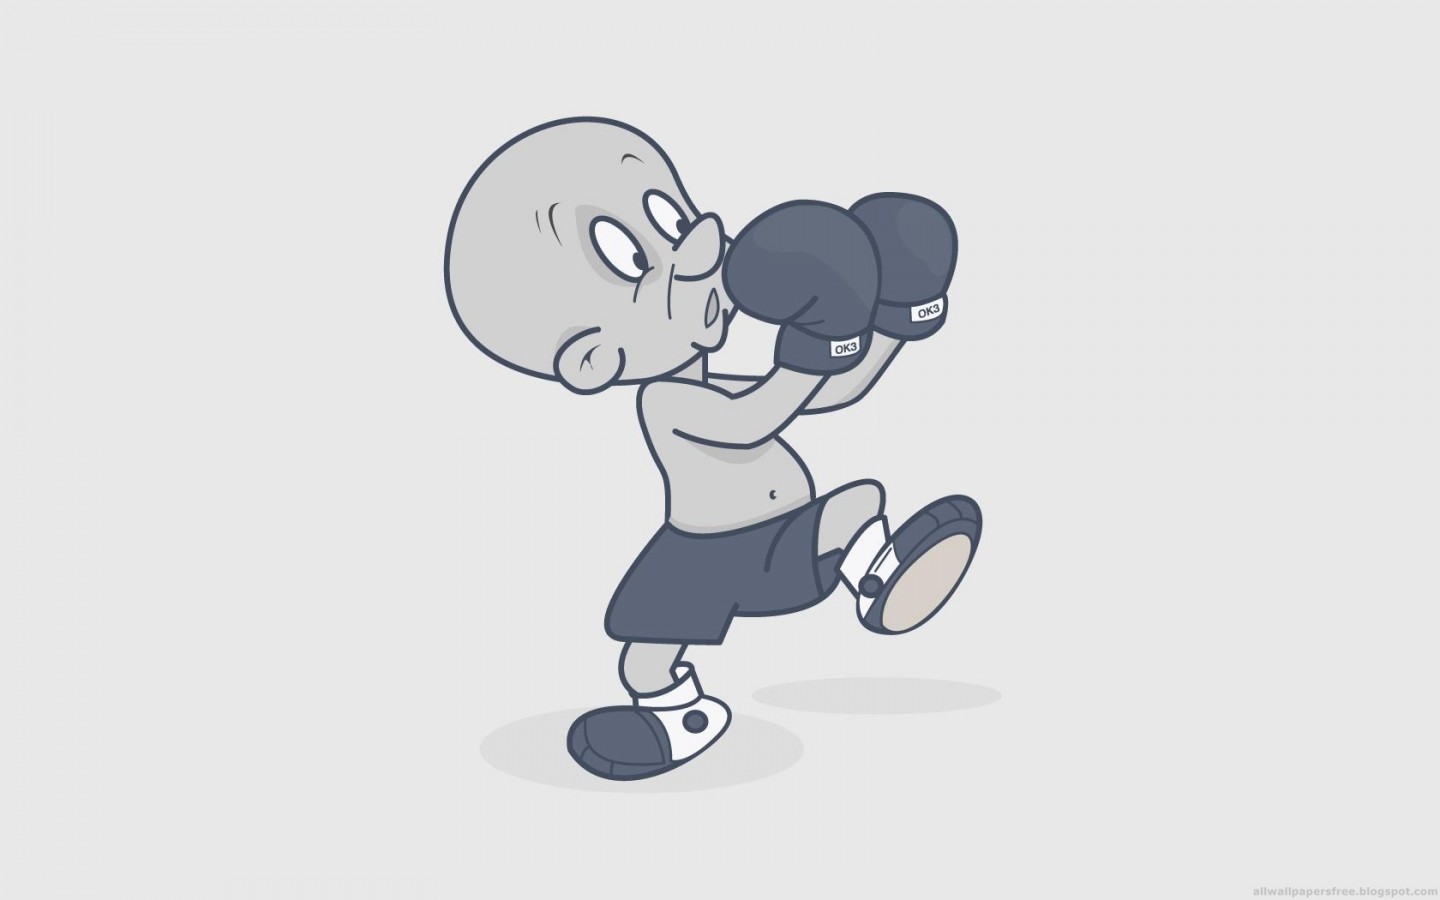 General 1440x900 cartoon boxing simple background humor gray background gray